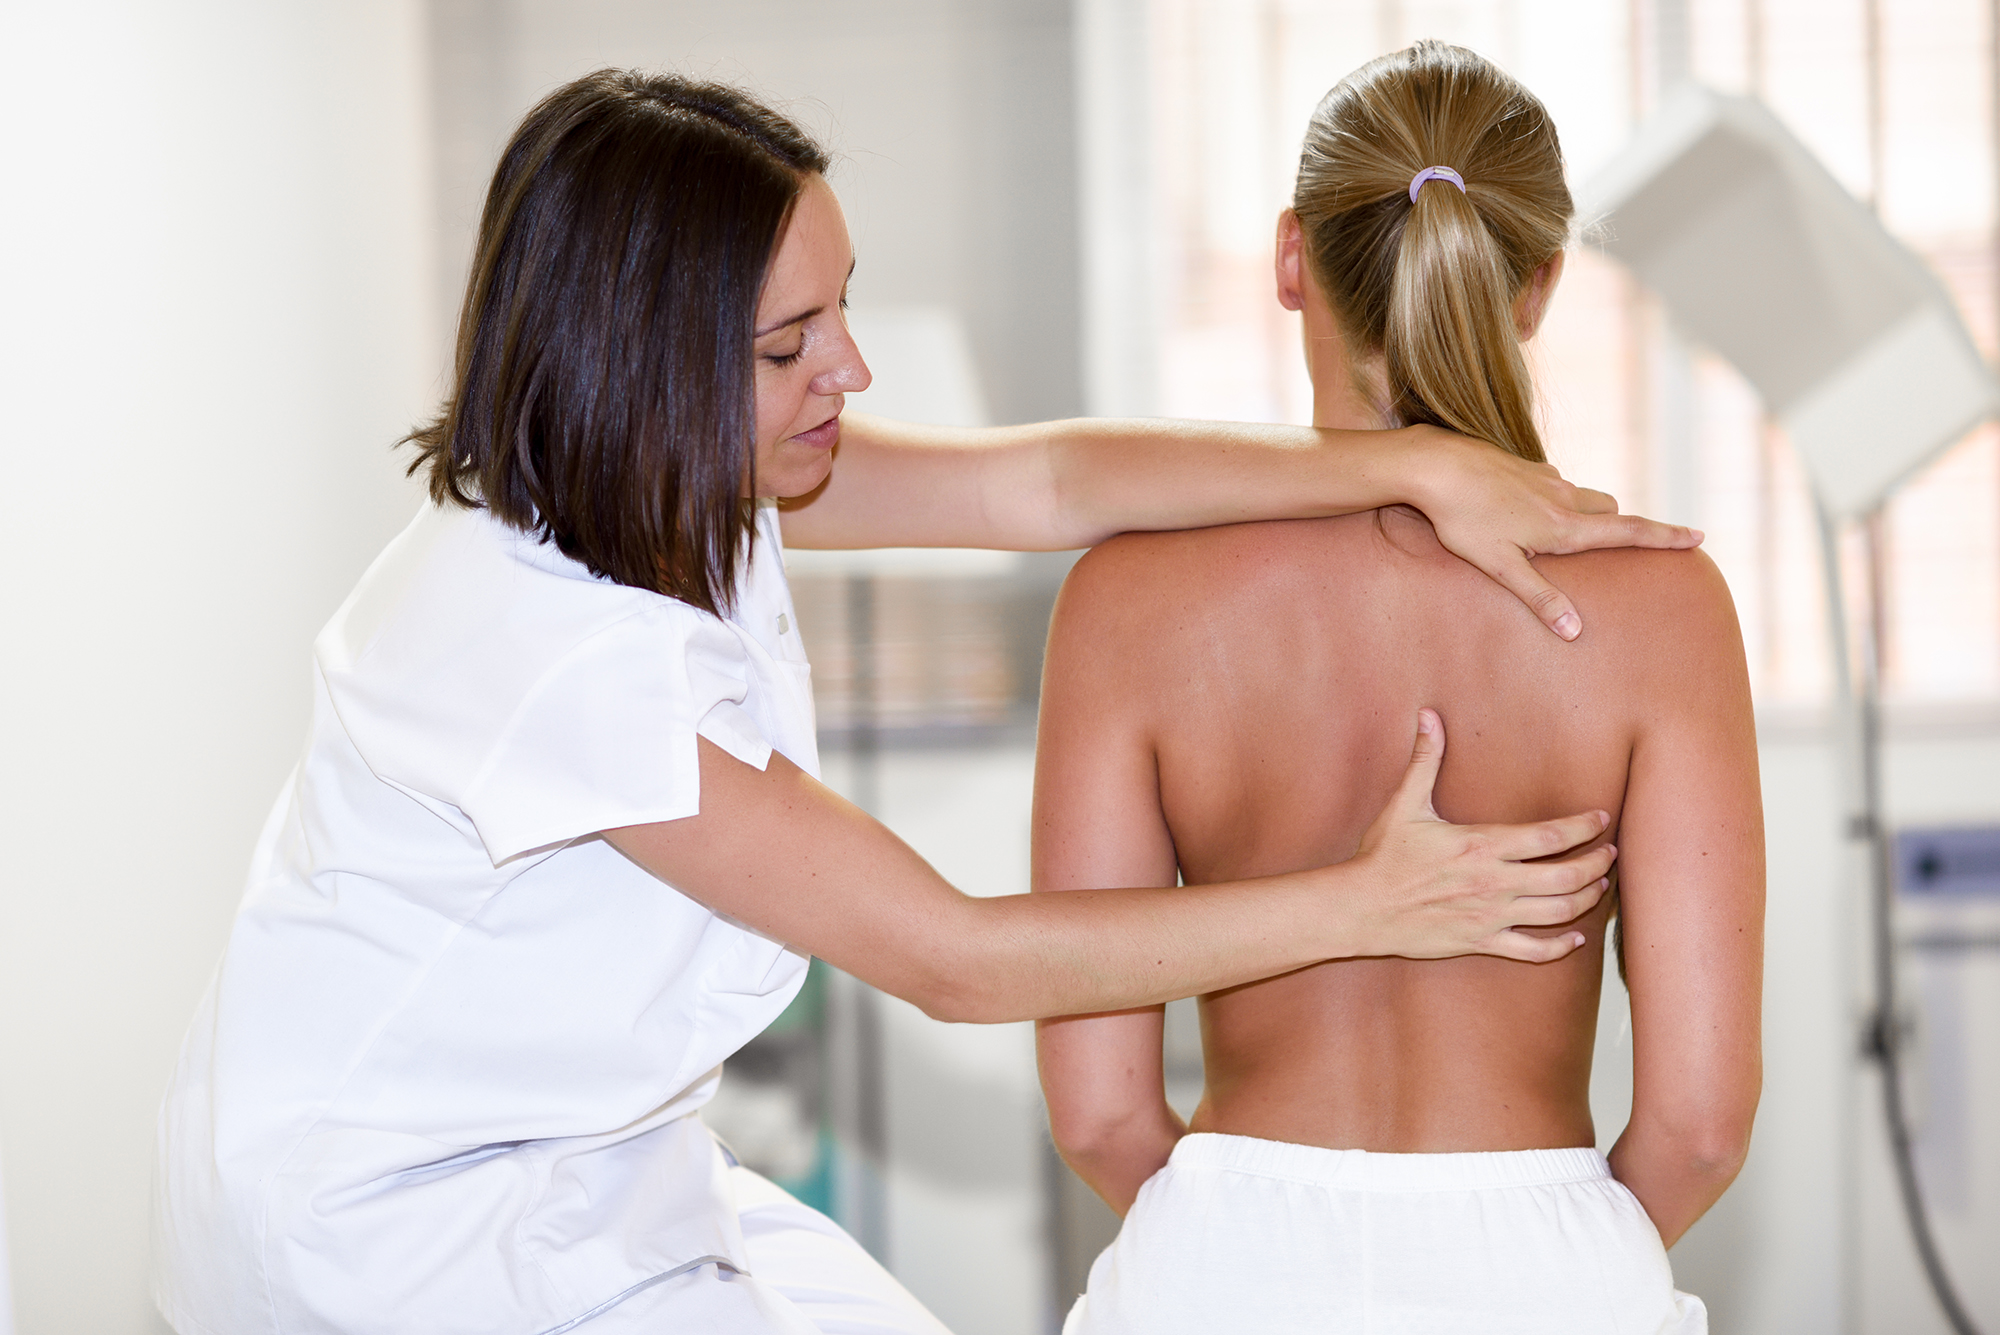 Medical check at the shoulder in a physiotherapy center.